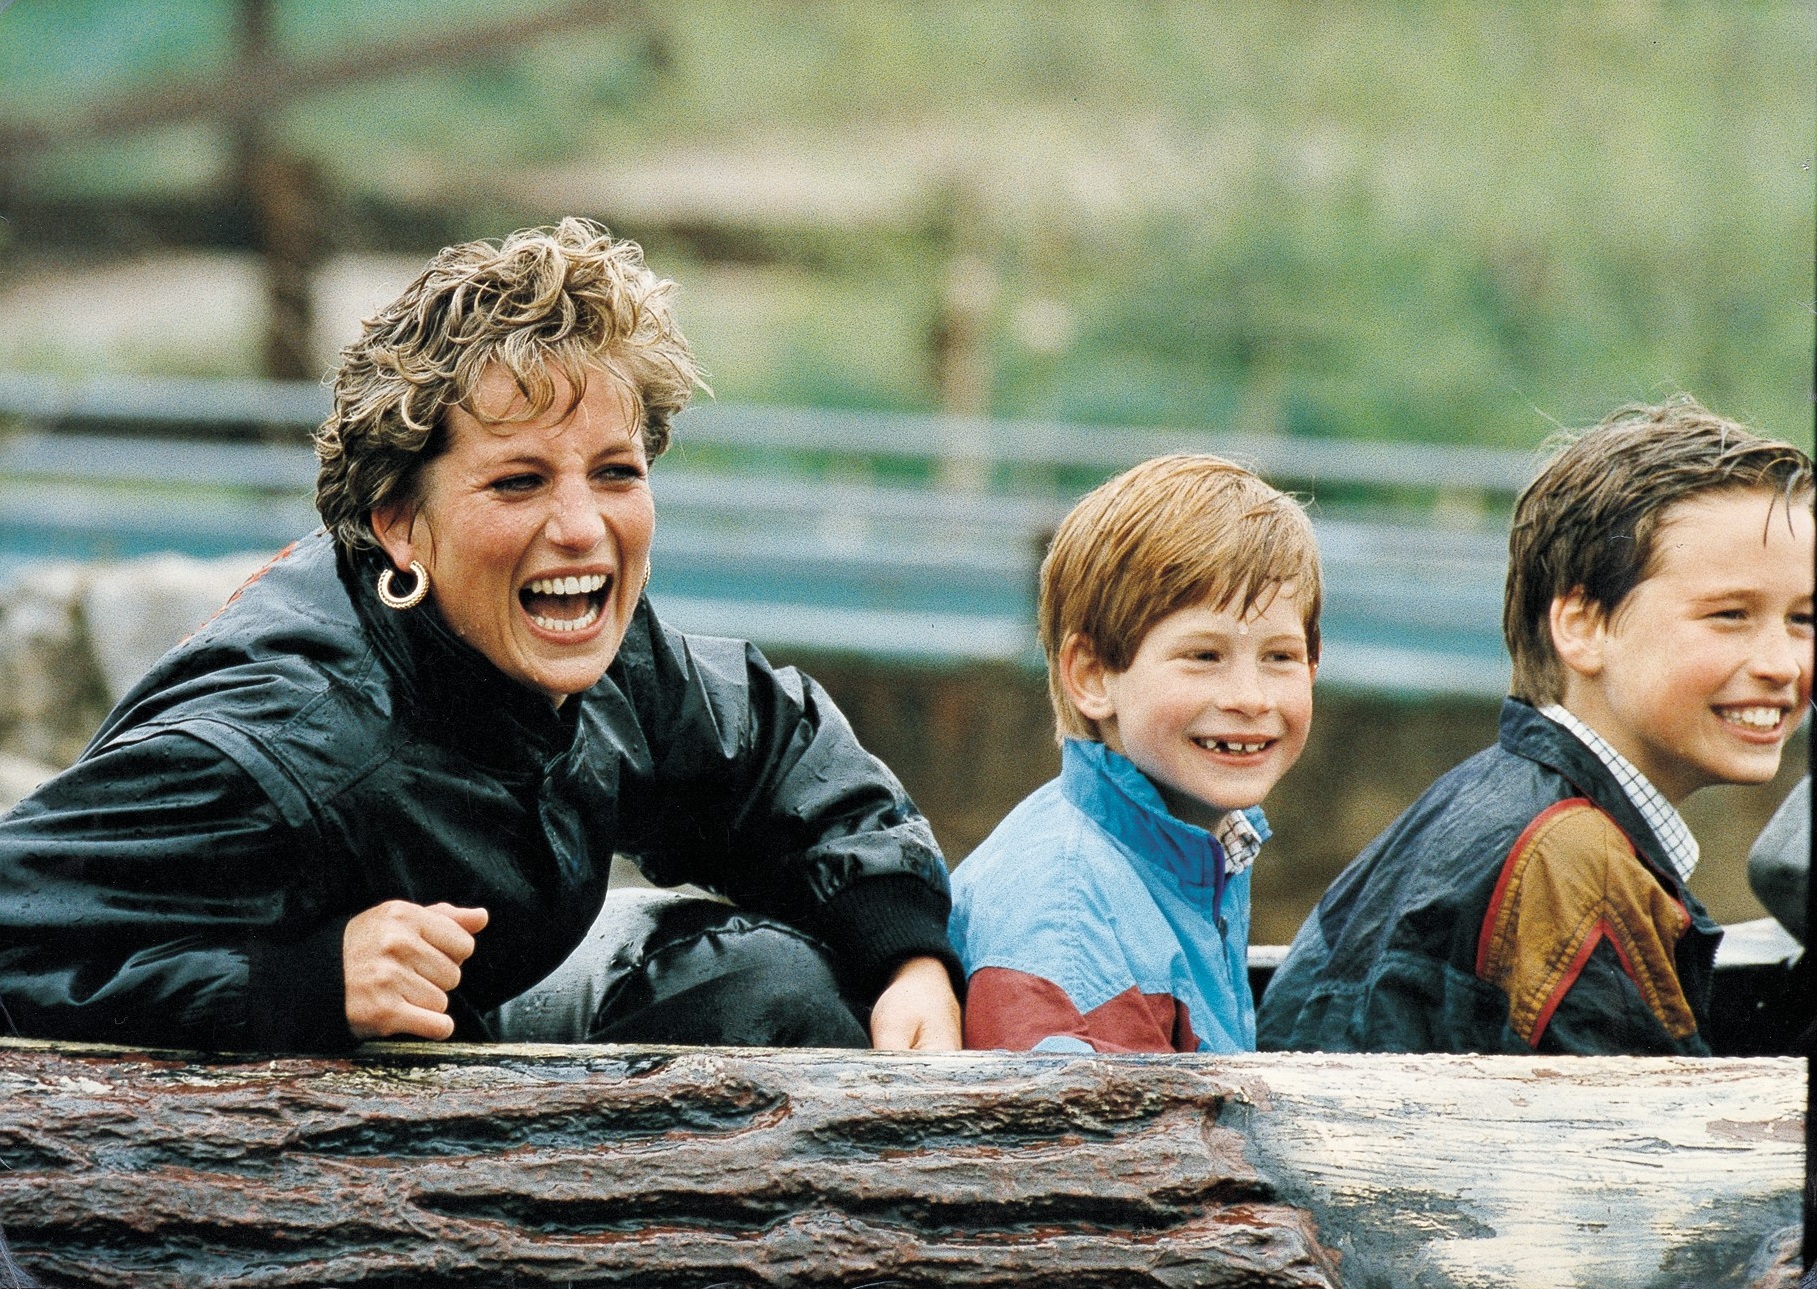 Apr 13, 1993 - London, London, United Kingdom - Diana, PRINCESS OF WALES (died 31/8/1997), with PRINCES WILLIAM and PRINCE HARRY on the Loggers Leap ride at Thorpe Park. A delighted Princess Diana and her sons launched themselves with laughter into the thrills, spills and spray of their favourite theme park yesterday. Getting soaked to the skin-and almost frightened out of it-was all part  of the fun as they went up, down and flying around on the high-tech rides. It was the third Easter holiday outing to Thorpe Park in Surrey for Diana, William and Harry. The Princess in black leather jacket, black jeans and suede ankle boots, paid for two Ł35 family Supersave tickets for her five-strong party. (, Image: 87515211, License: Rights-managed, Restrictions: , Model Release: no, Credit line: Mike Forster / Solo / Profimedia